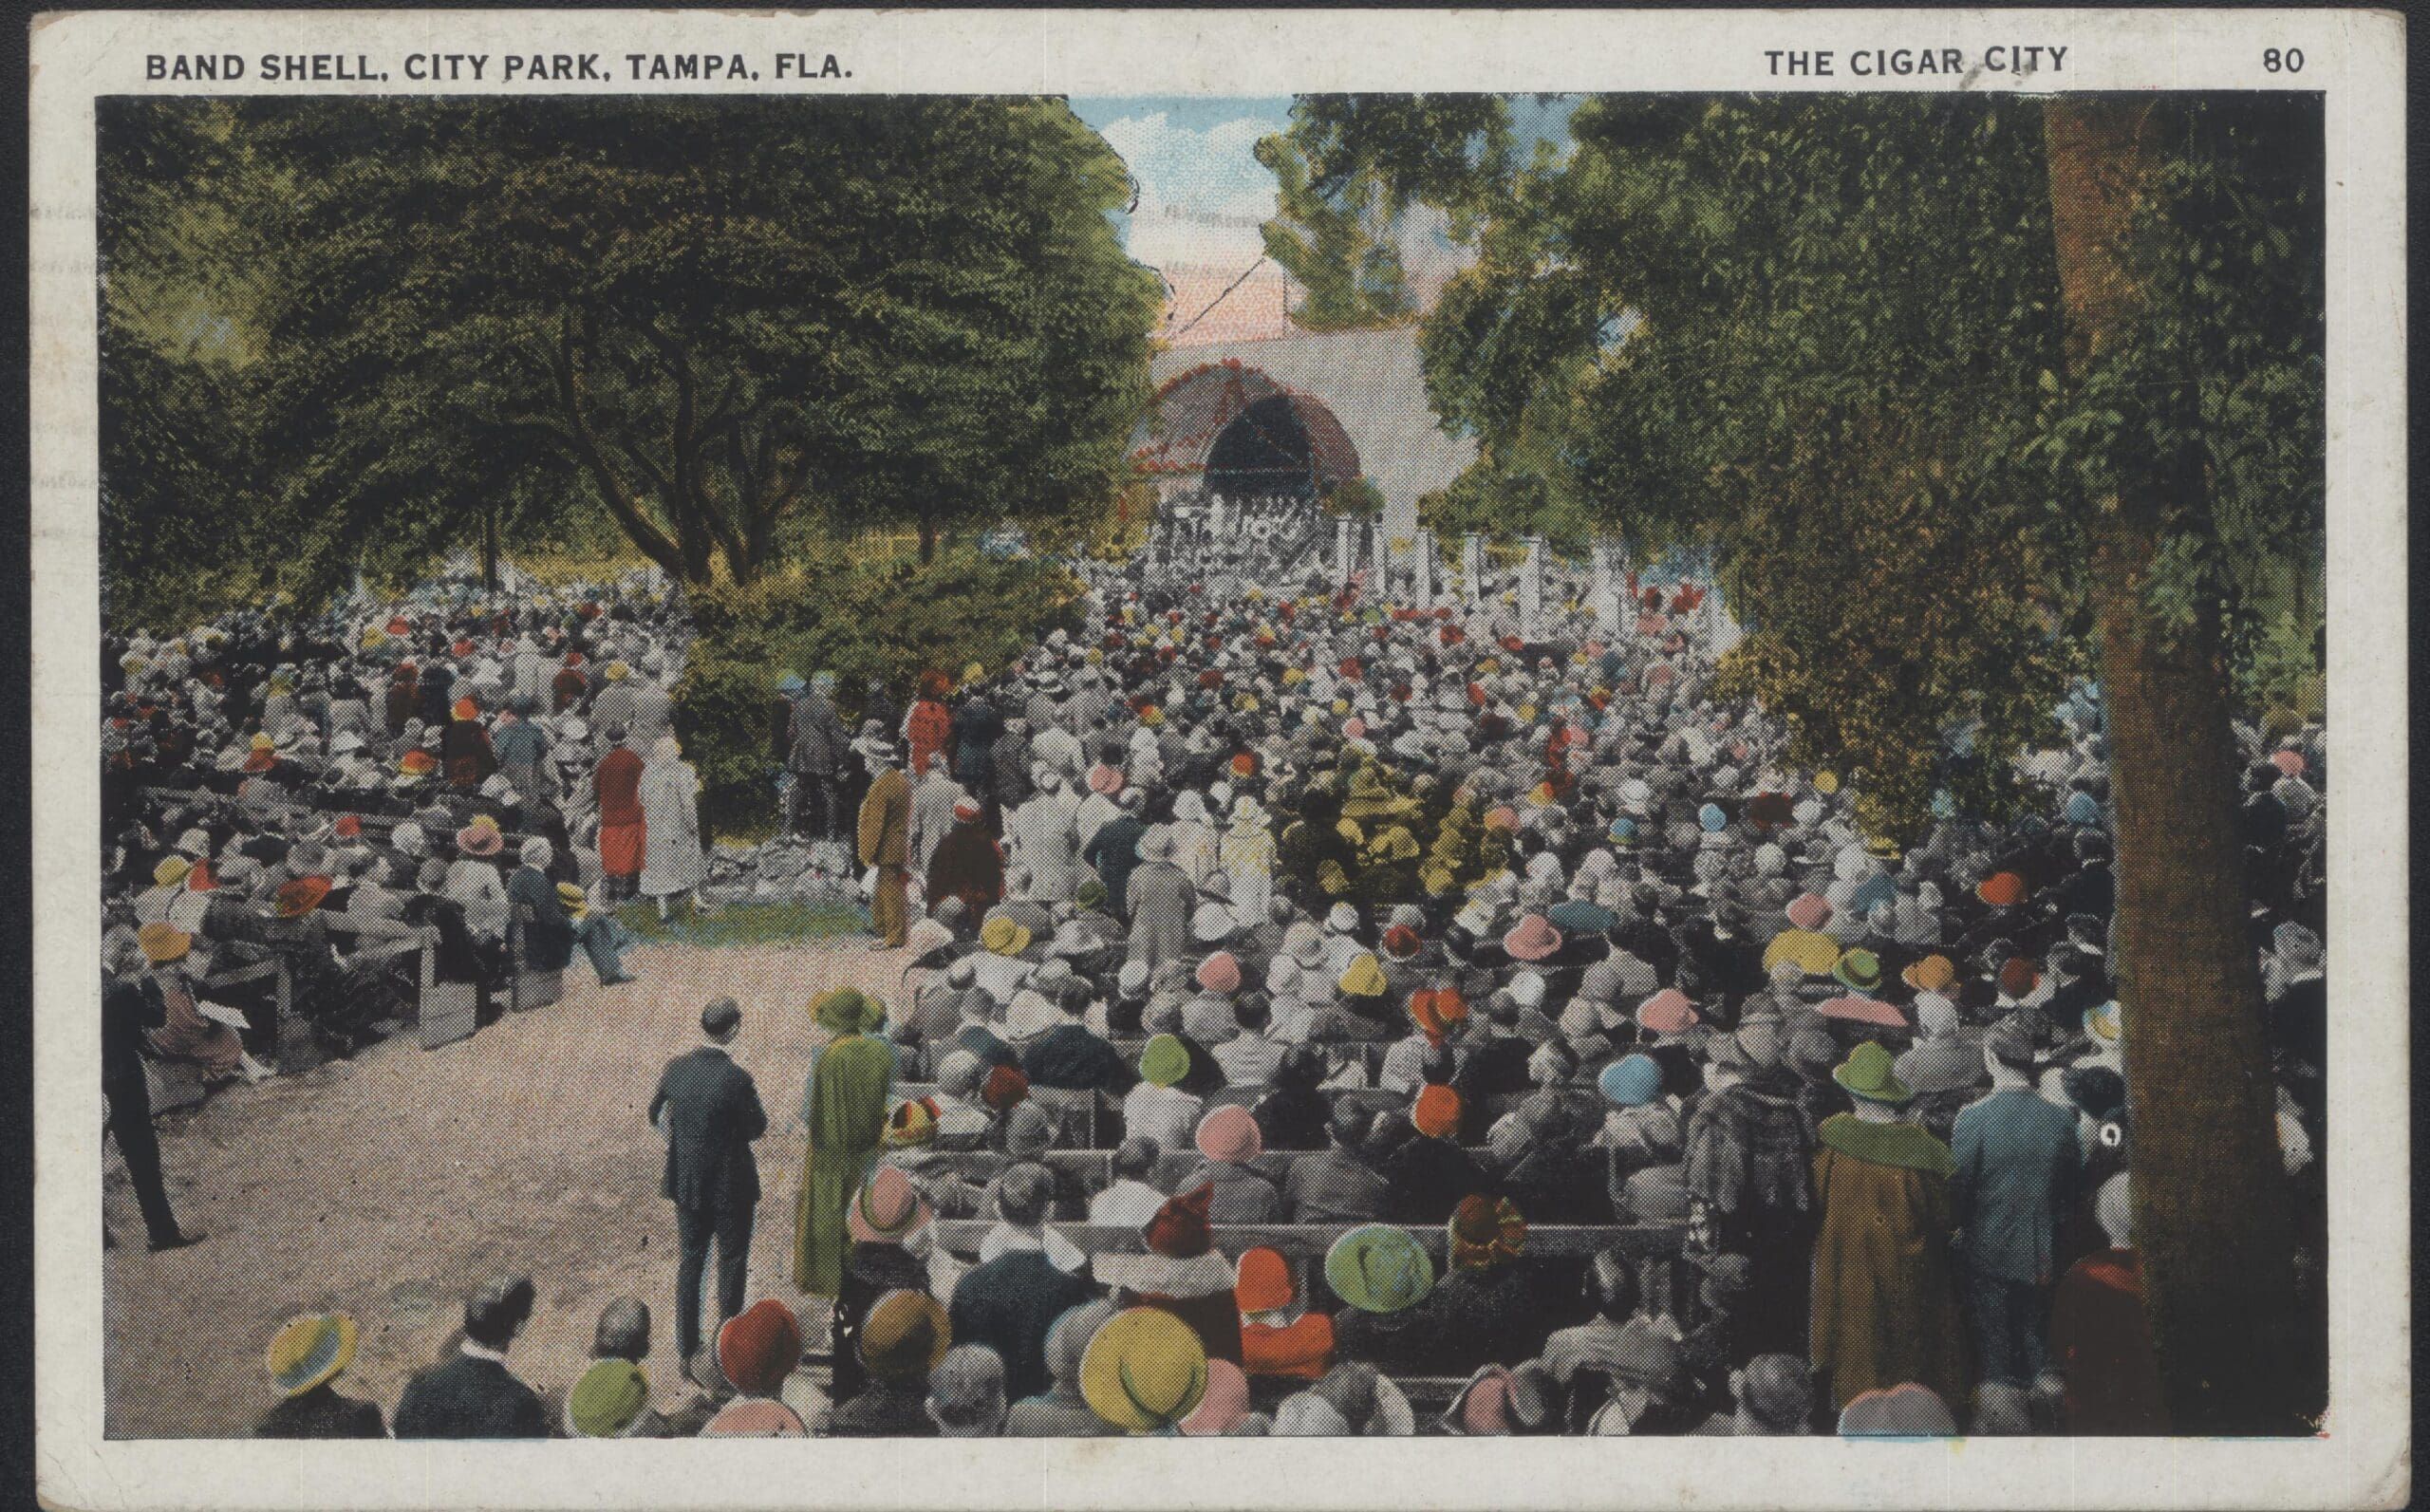 Band Shell, City Park, postmarked 1942